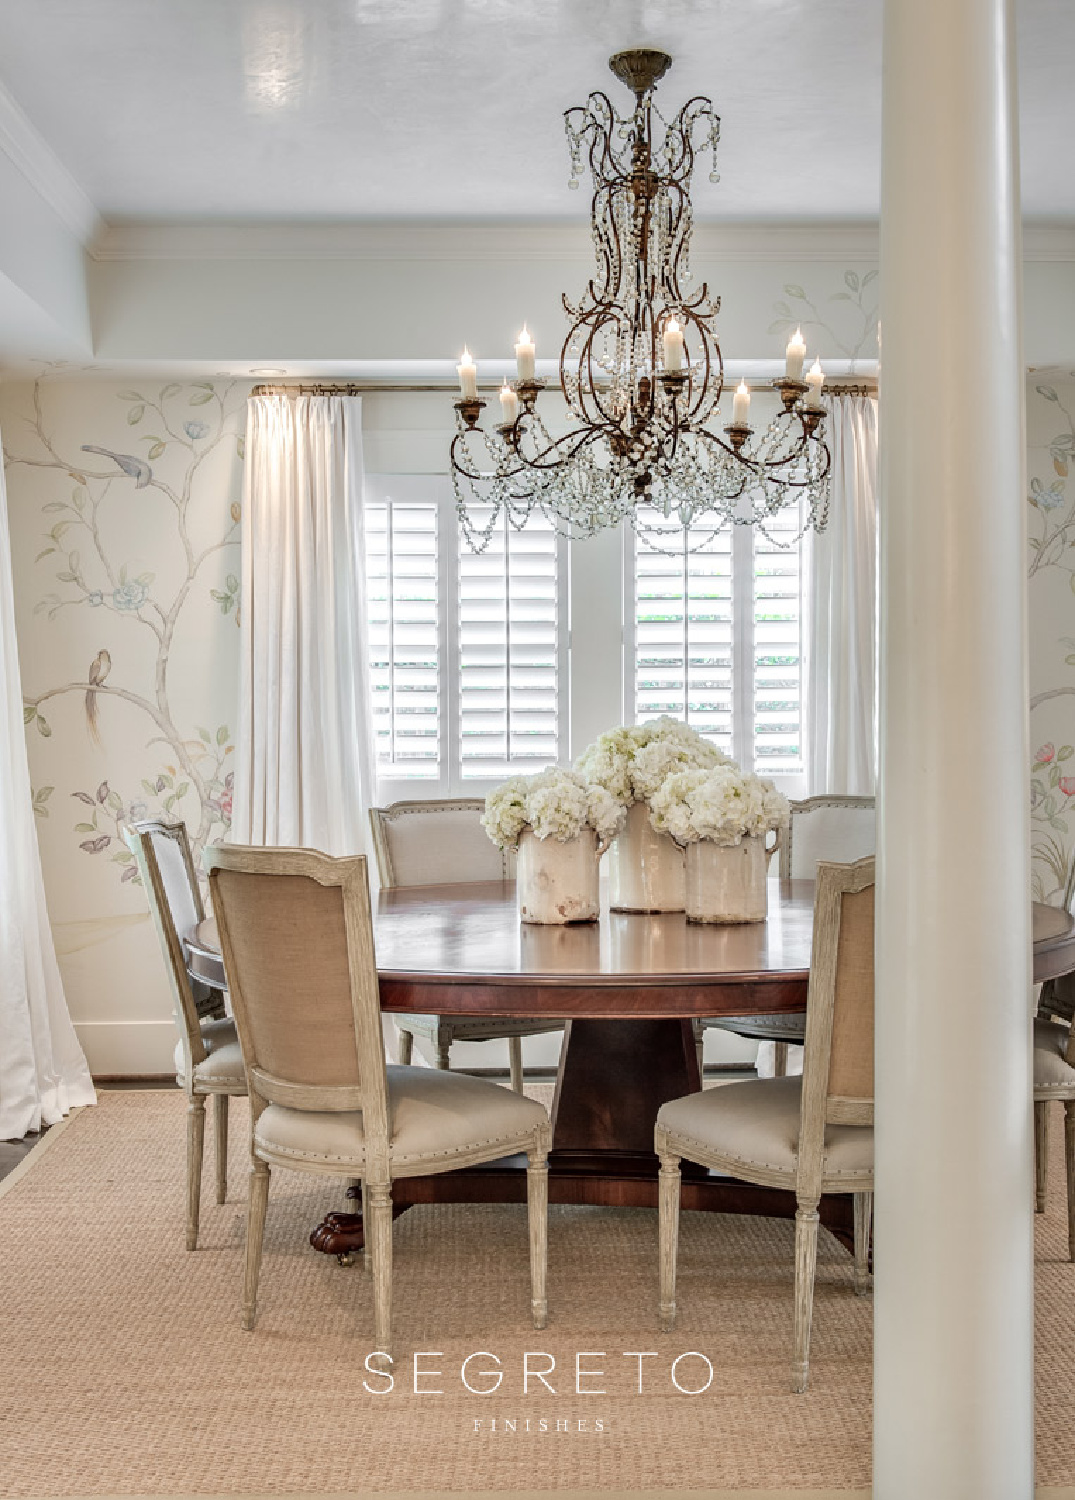 Lovely dining room with mural painted by Segreto Finishes, round pedestal table, and grand chandelier.